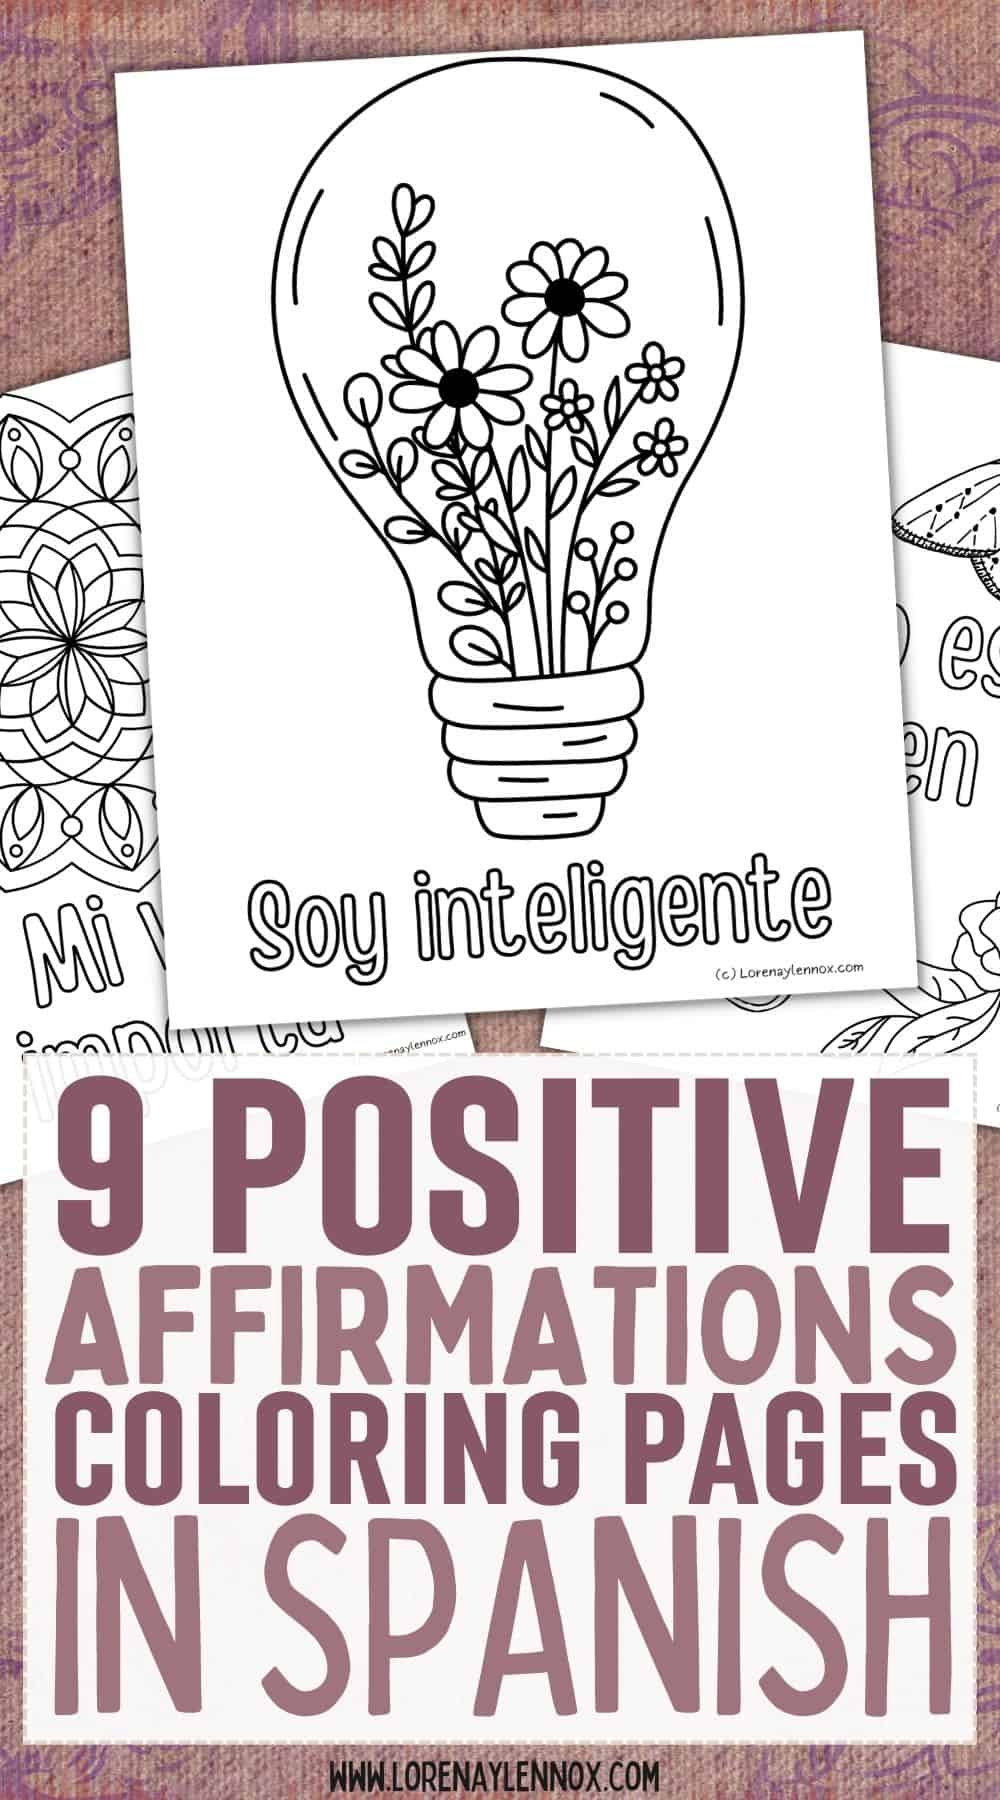 9 Positive Affirmations Coloring Pages in Spanish For Kids